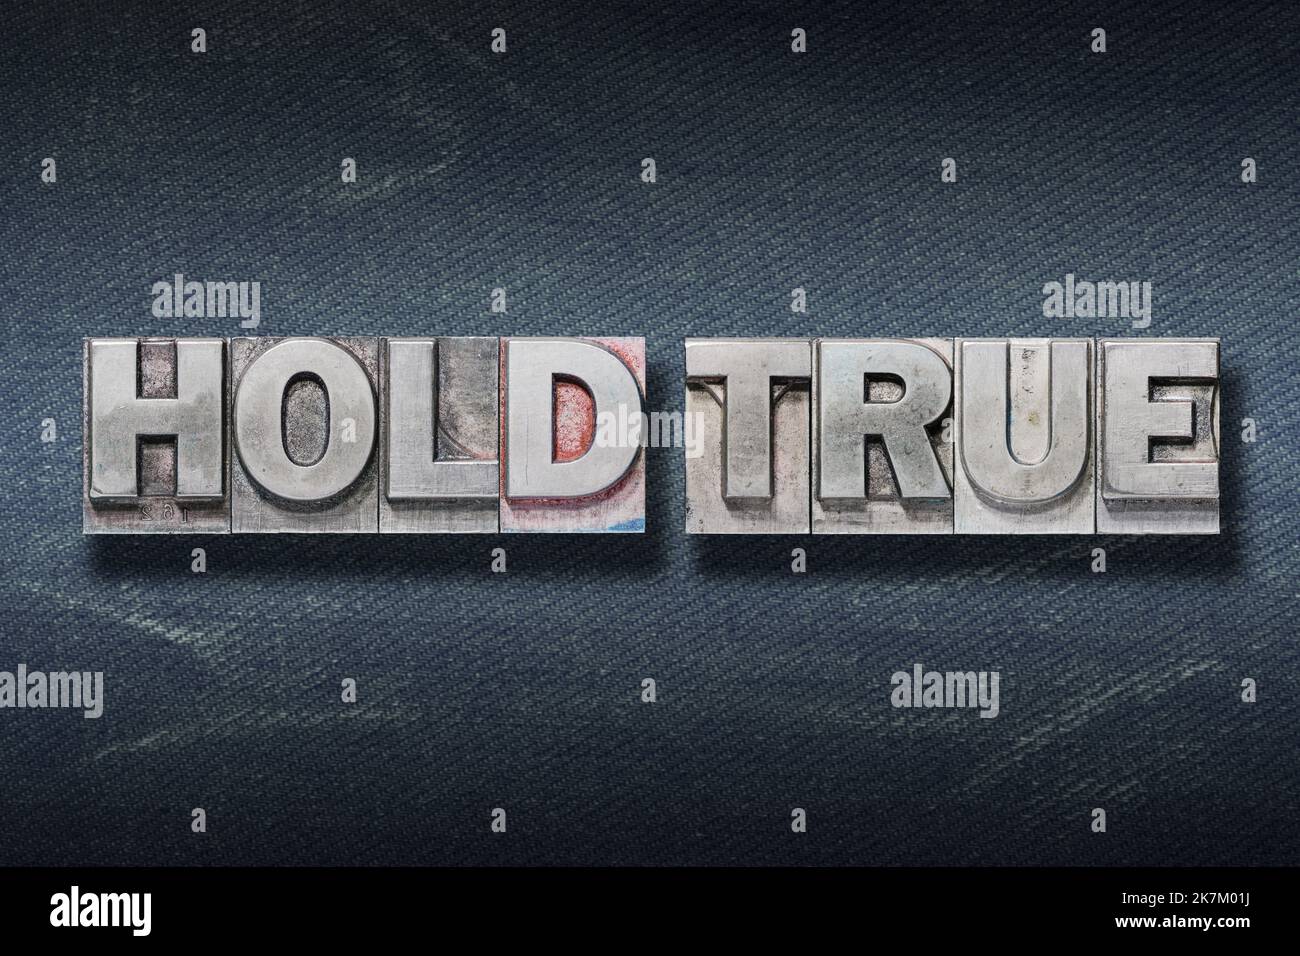 hold true phrase made from metallic letterpress on dark jeans background Stock Photo